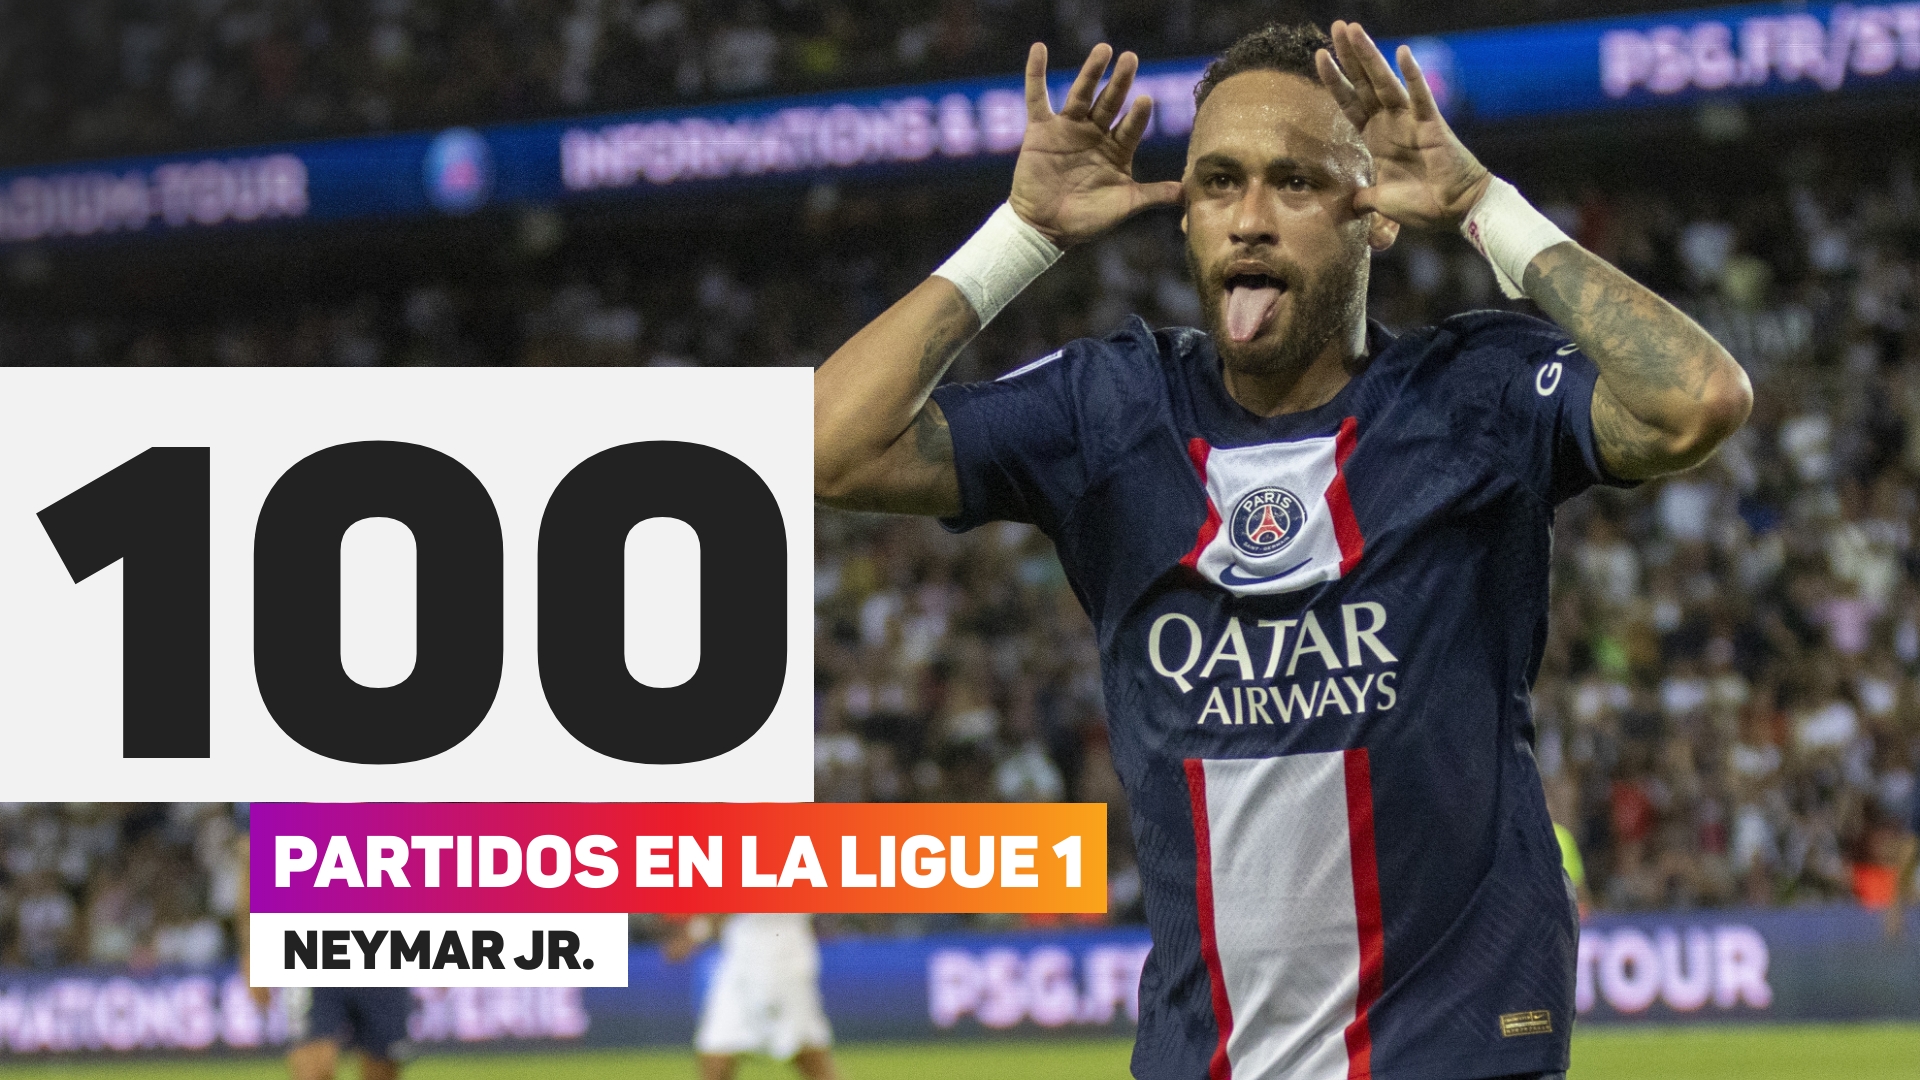 Neymar Jr 100 appearances with PSG in Ligue 1